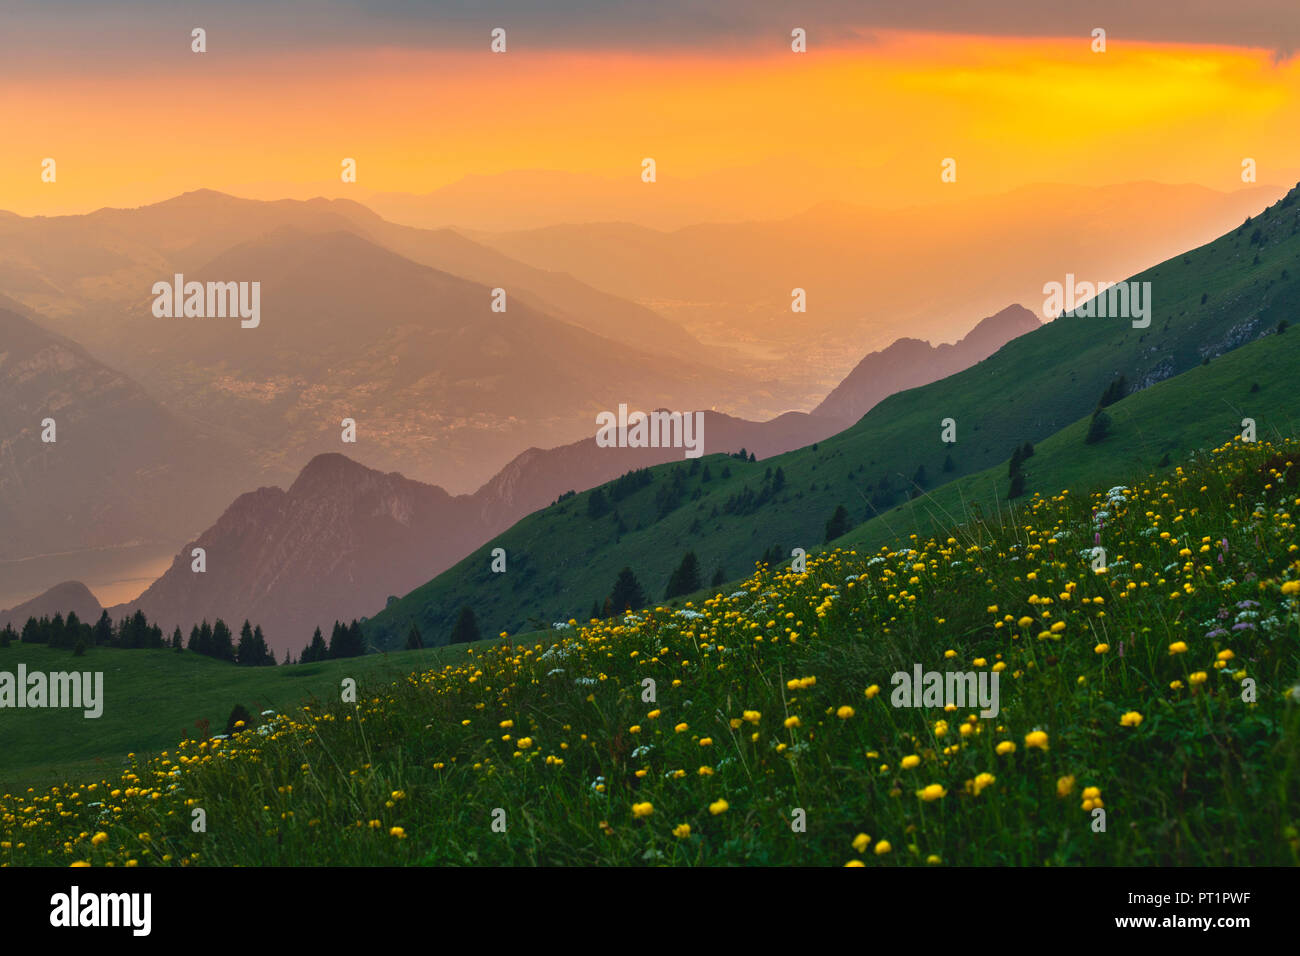 Mount Guglielmo at sunset, Lombardy district, Brescia province, Italy, Stock Photo